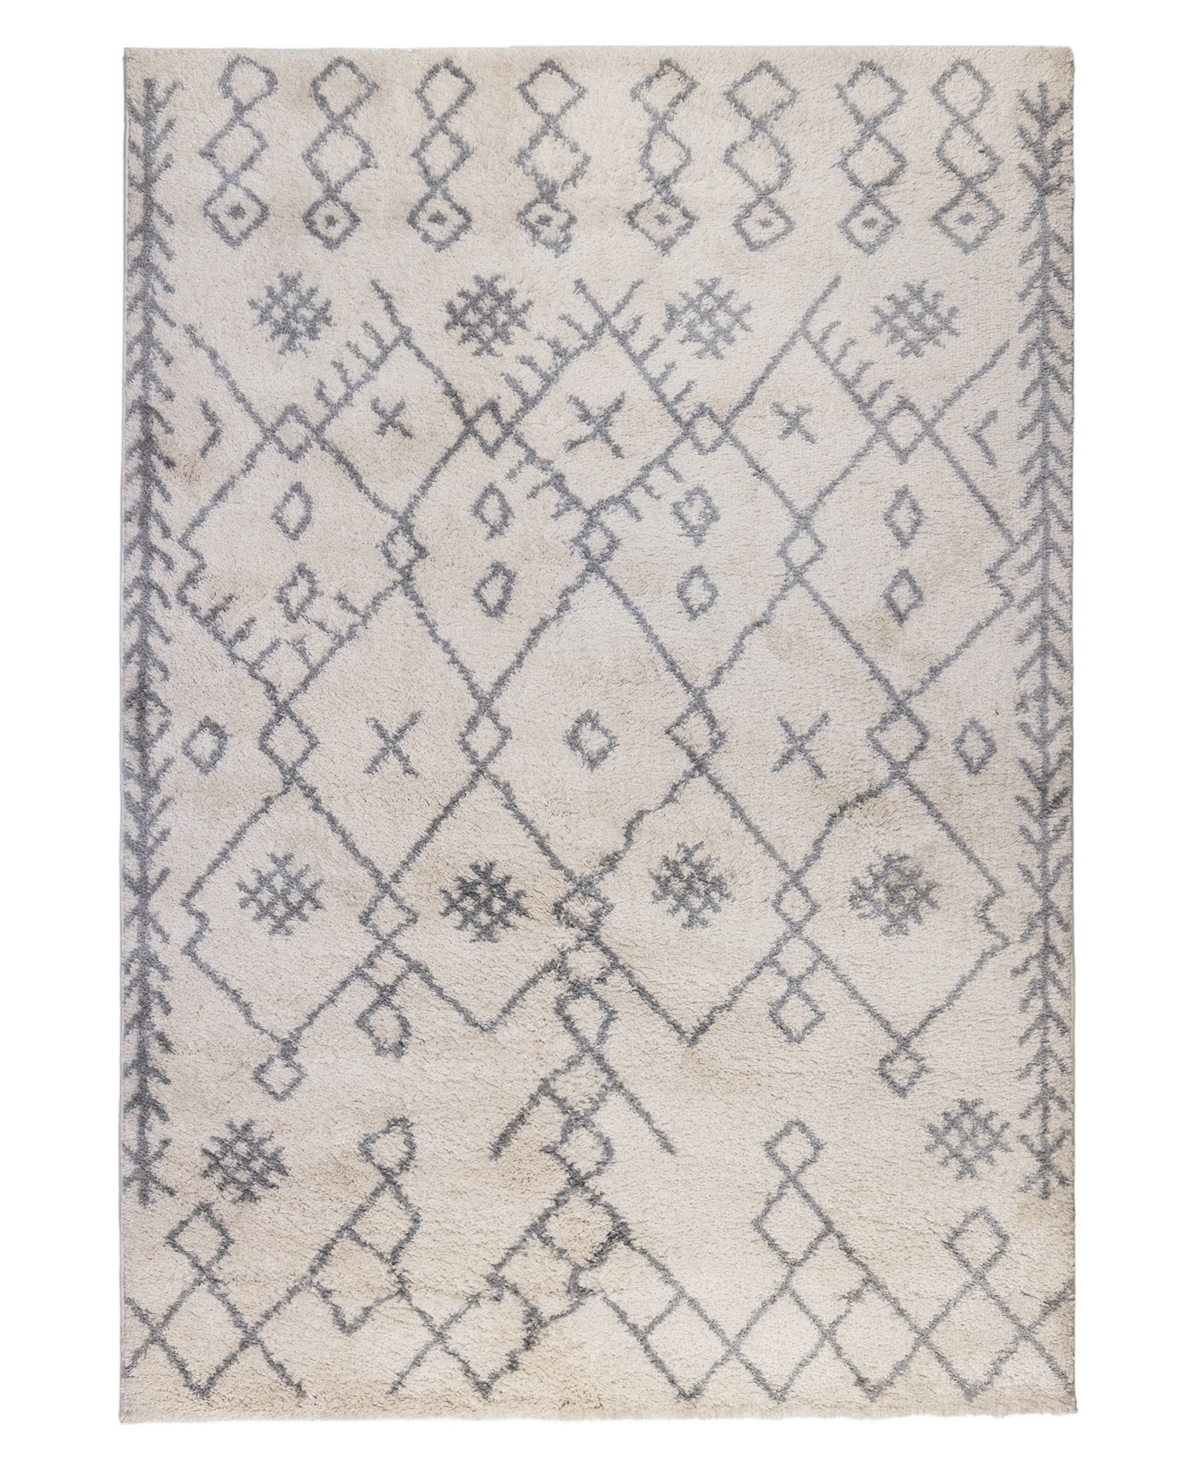 Amer Rugs Asp6 8'3" X 11'6" Area Rug In Ivory/gray